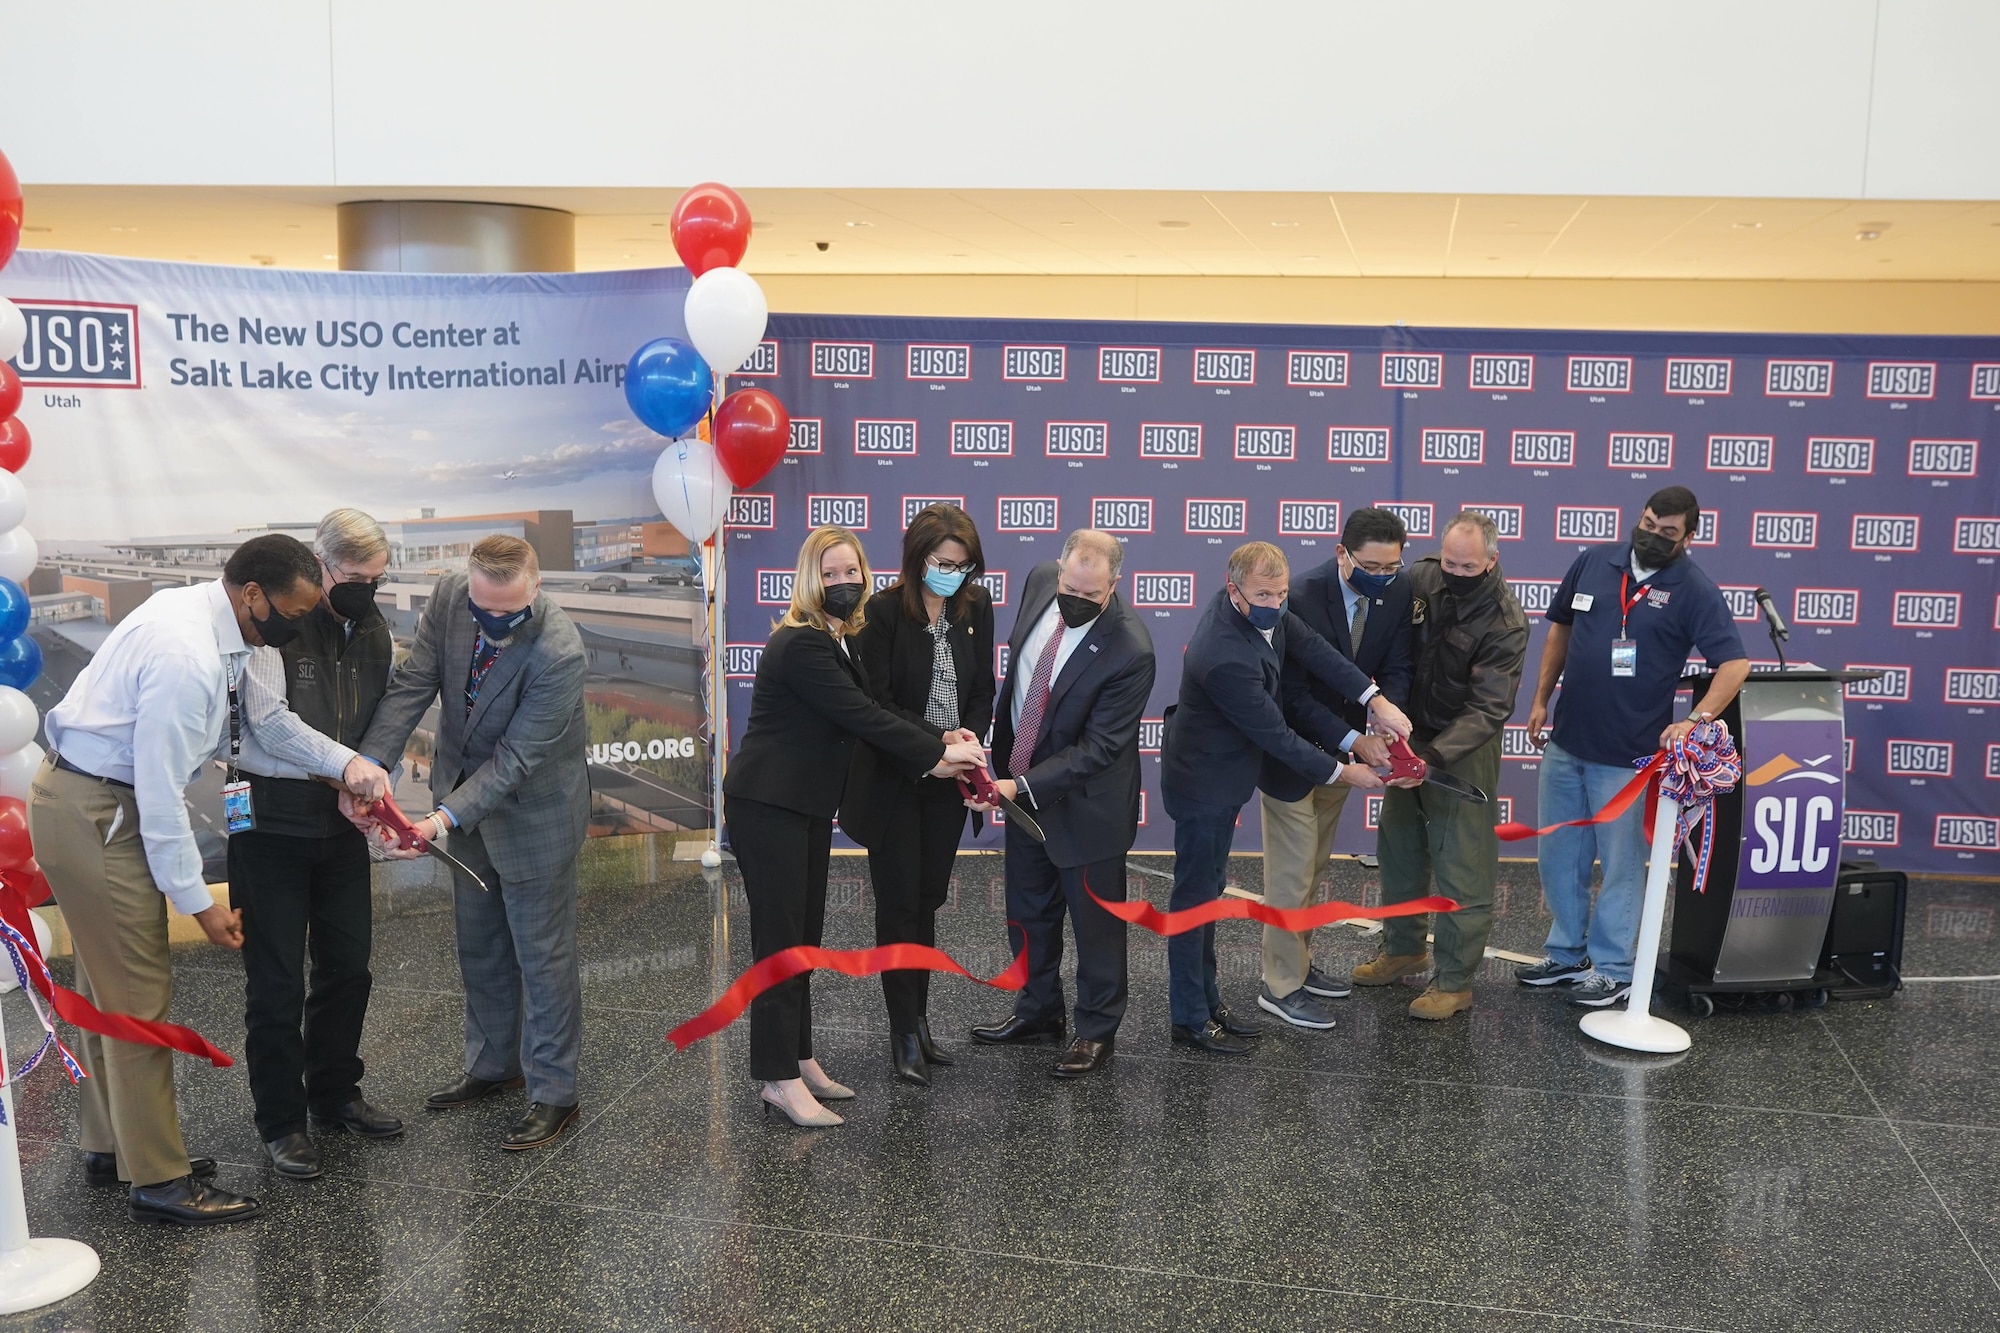 The USO Utah Center at Salt Lake City International Airport opened officially Feb. 4